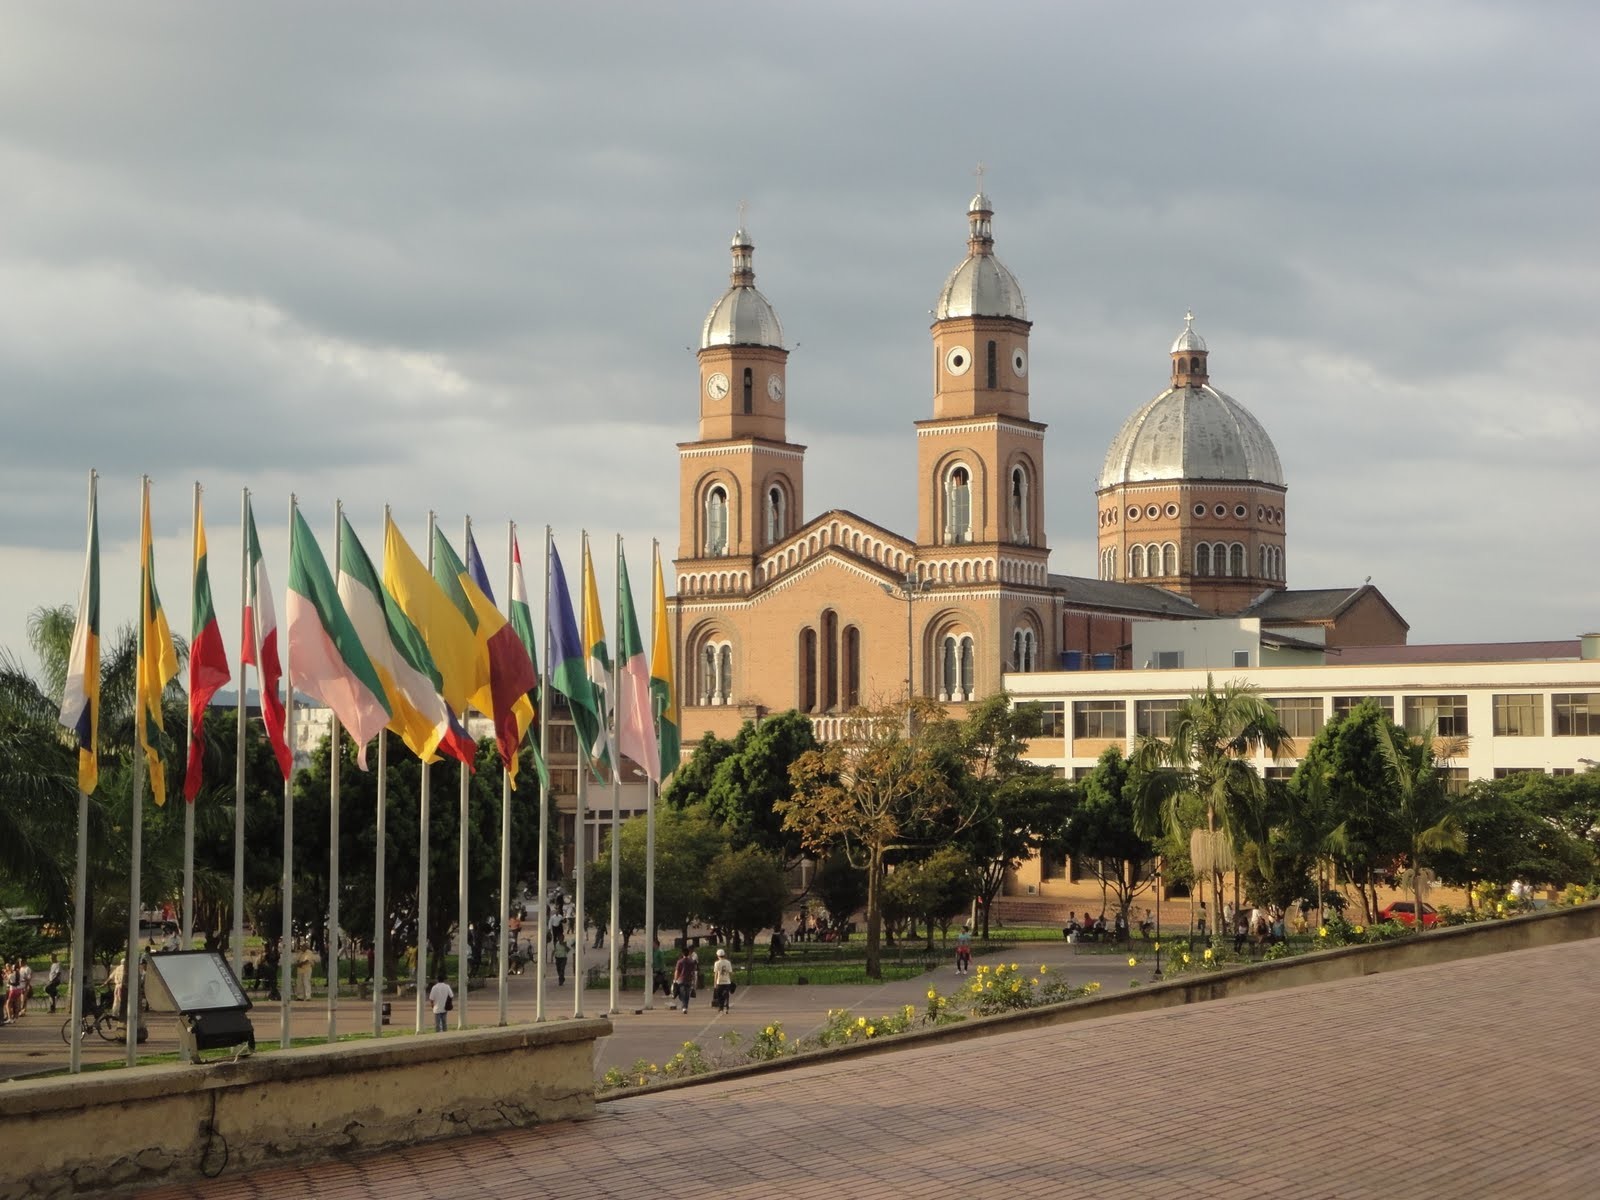 My Experience in Armenia, Colombia by Iván